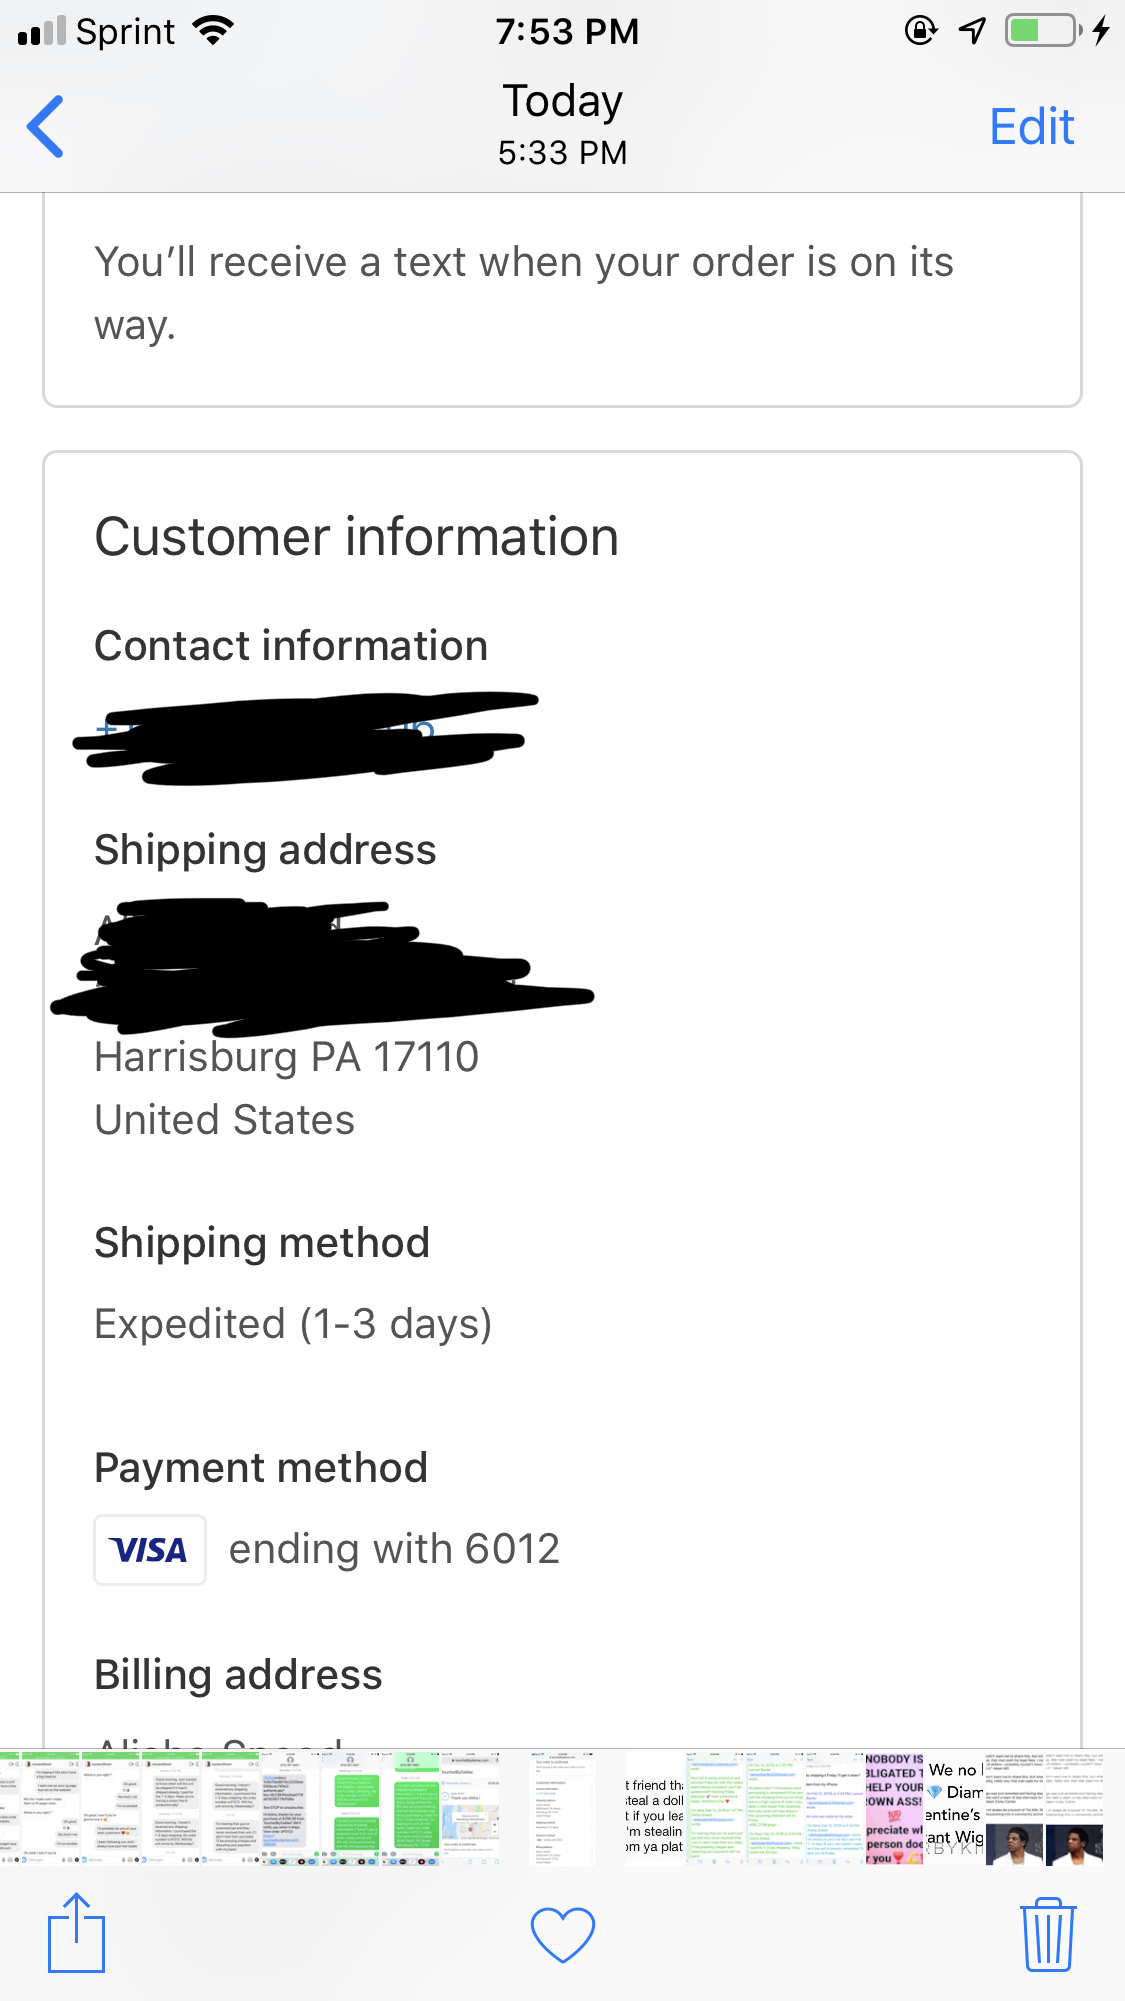 Shipping 1-3 days paid 